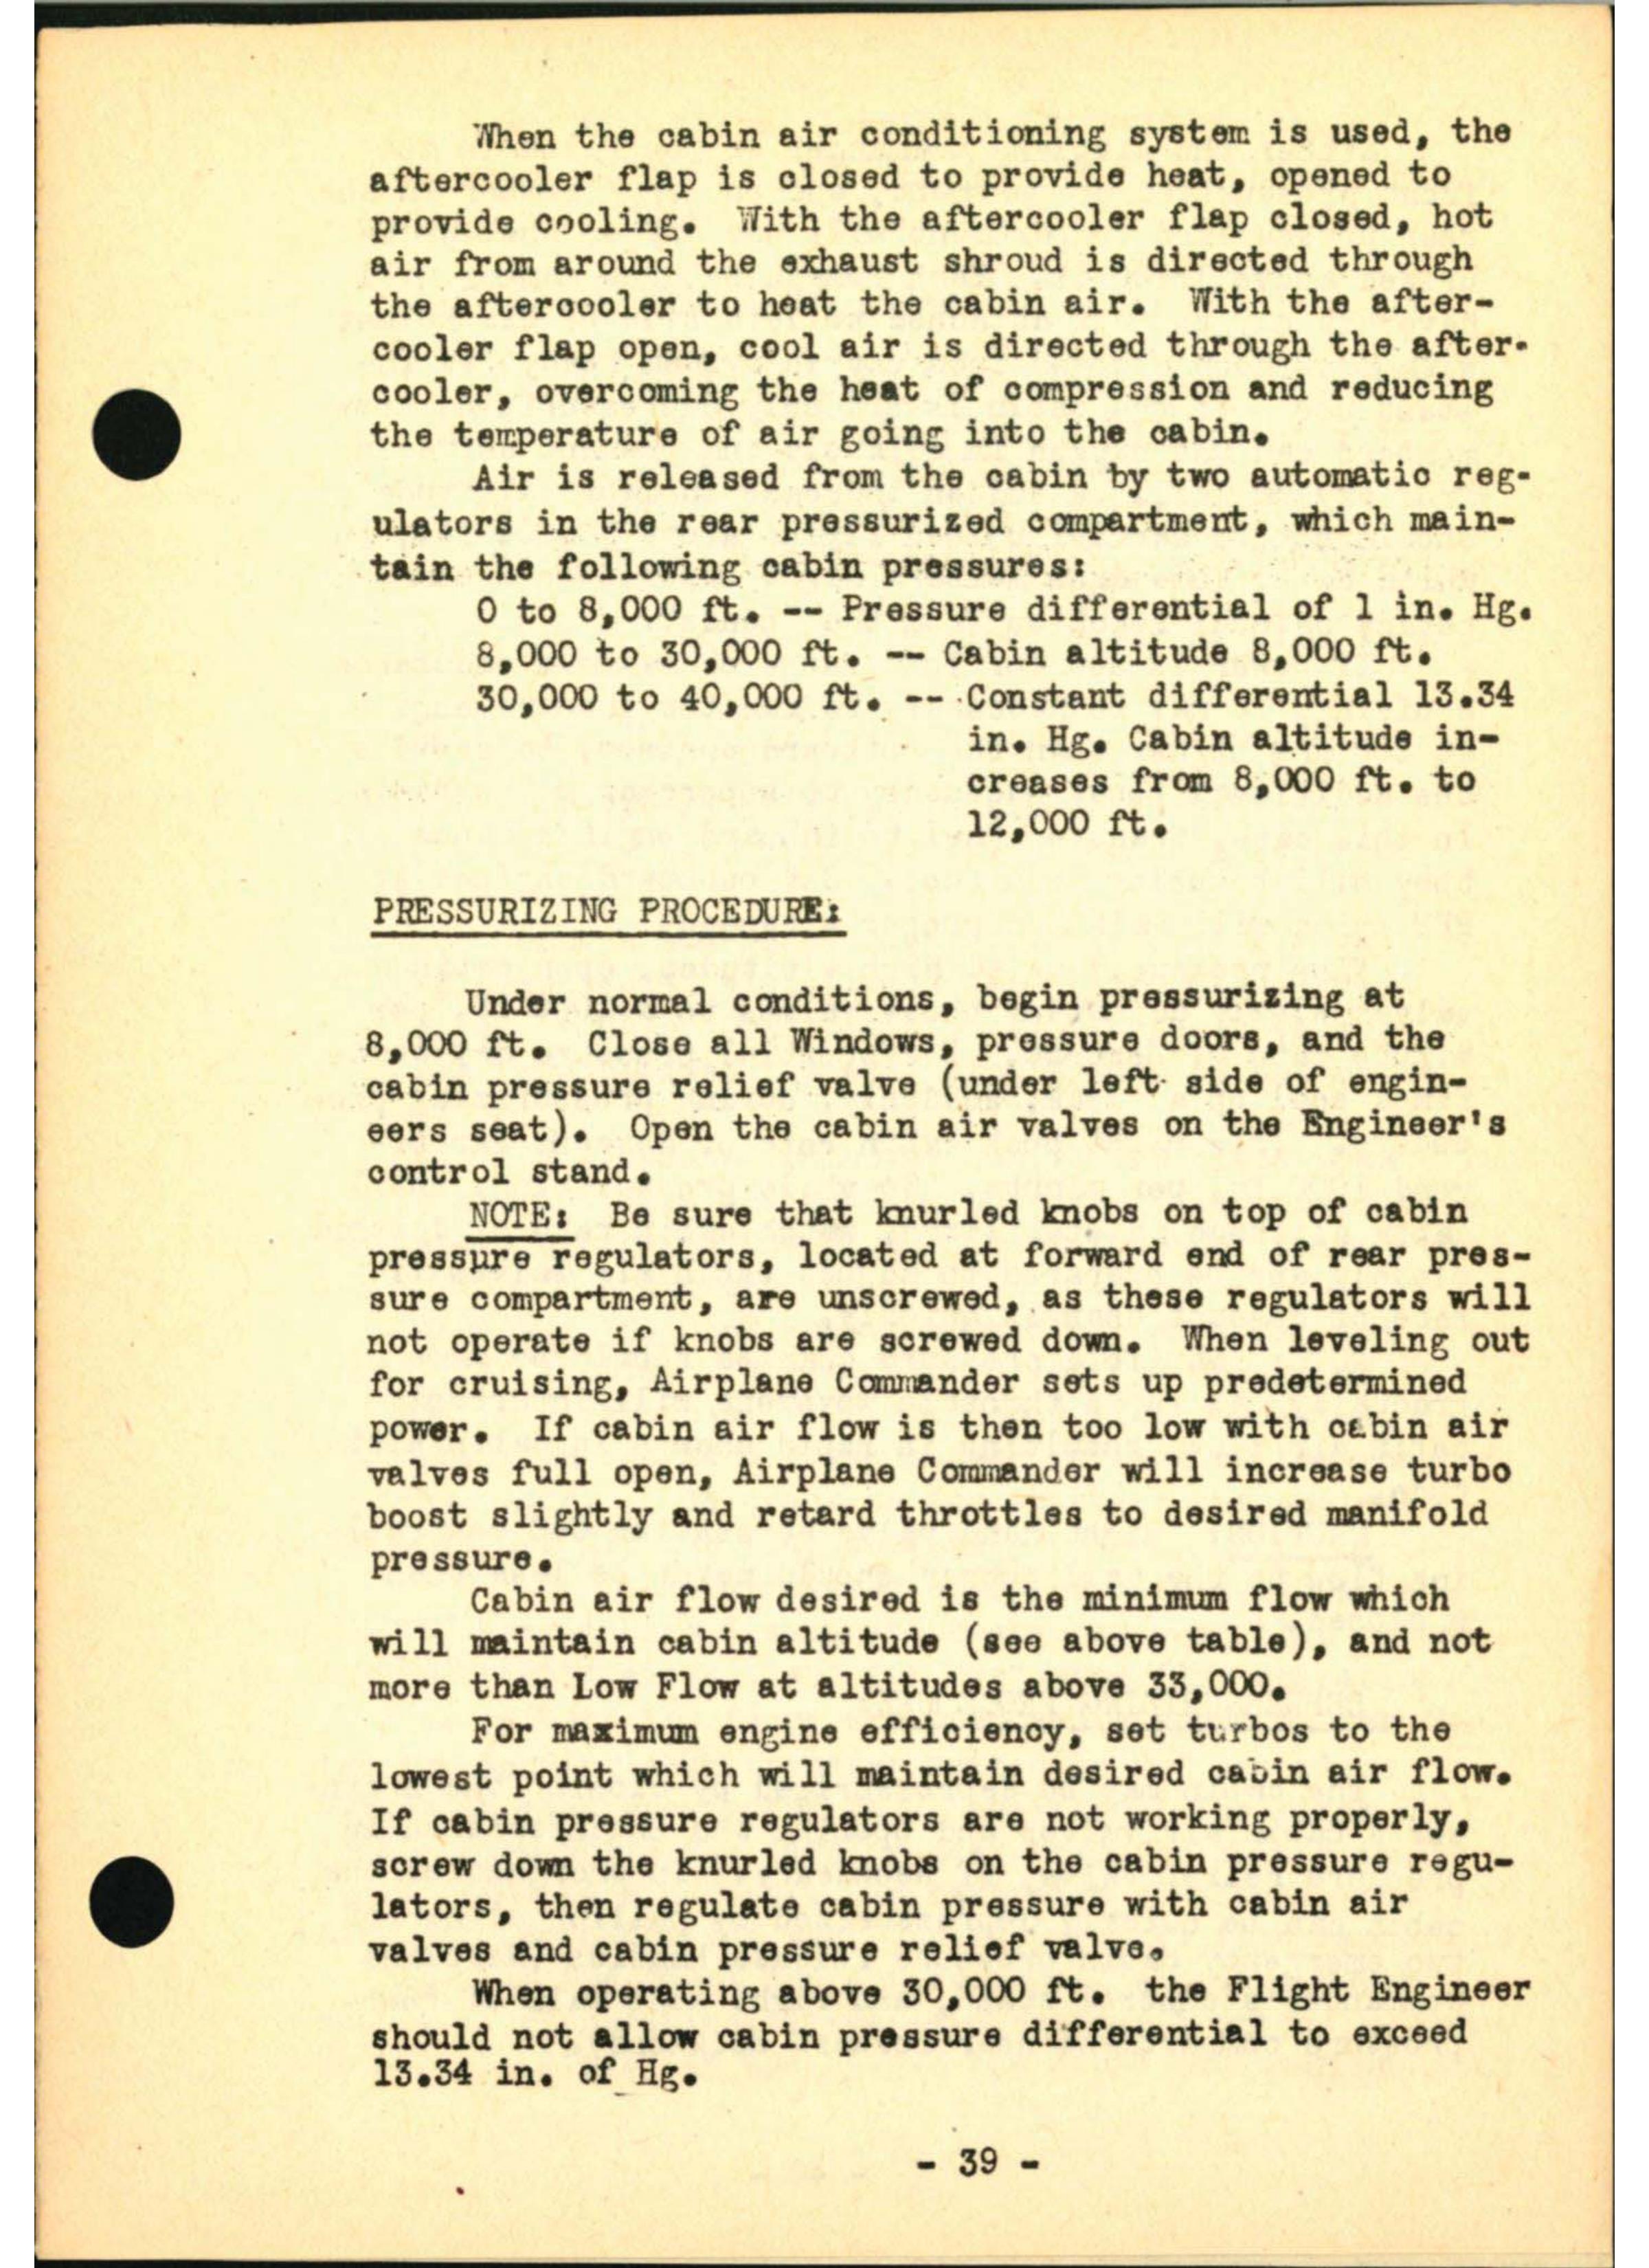 Sample page  44 from AirCorps Library document: B-29 Standard Procedures for Flight Engineers, Second Air Force